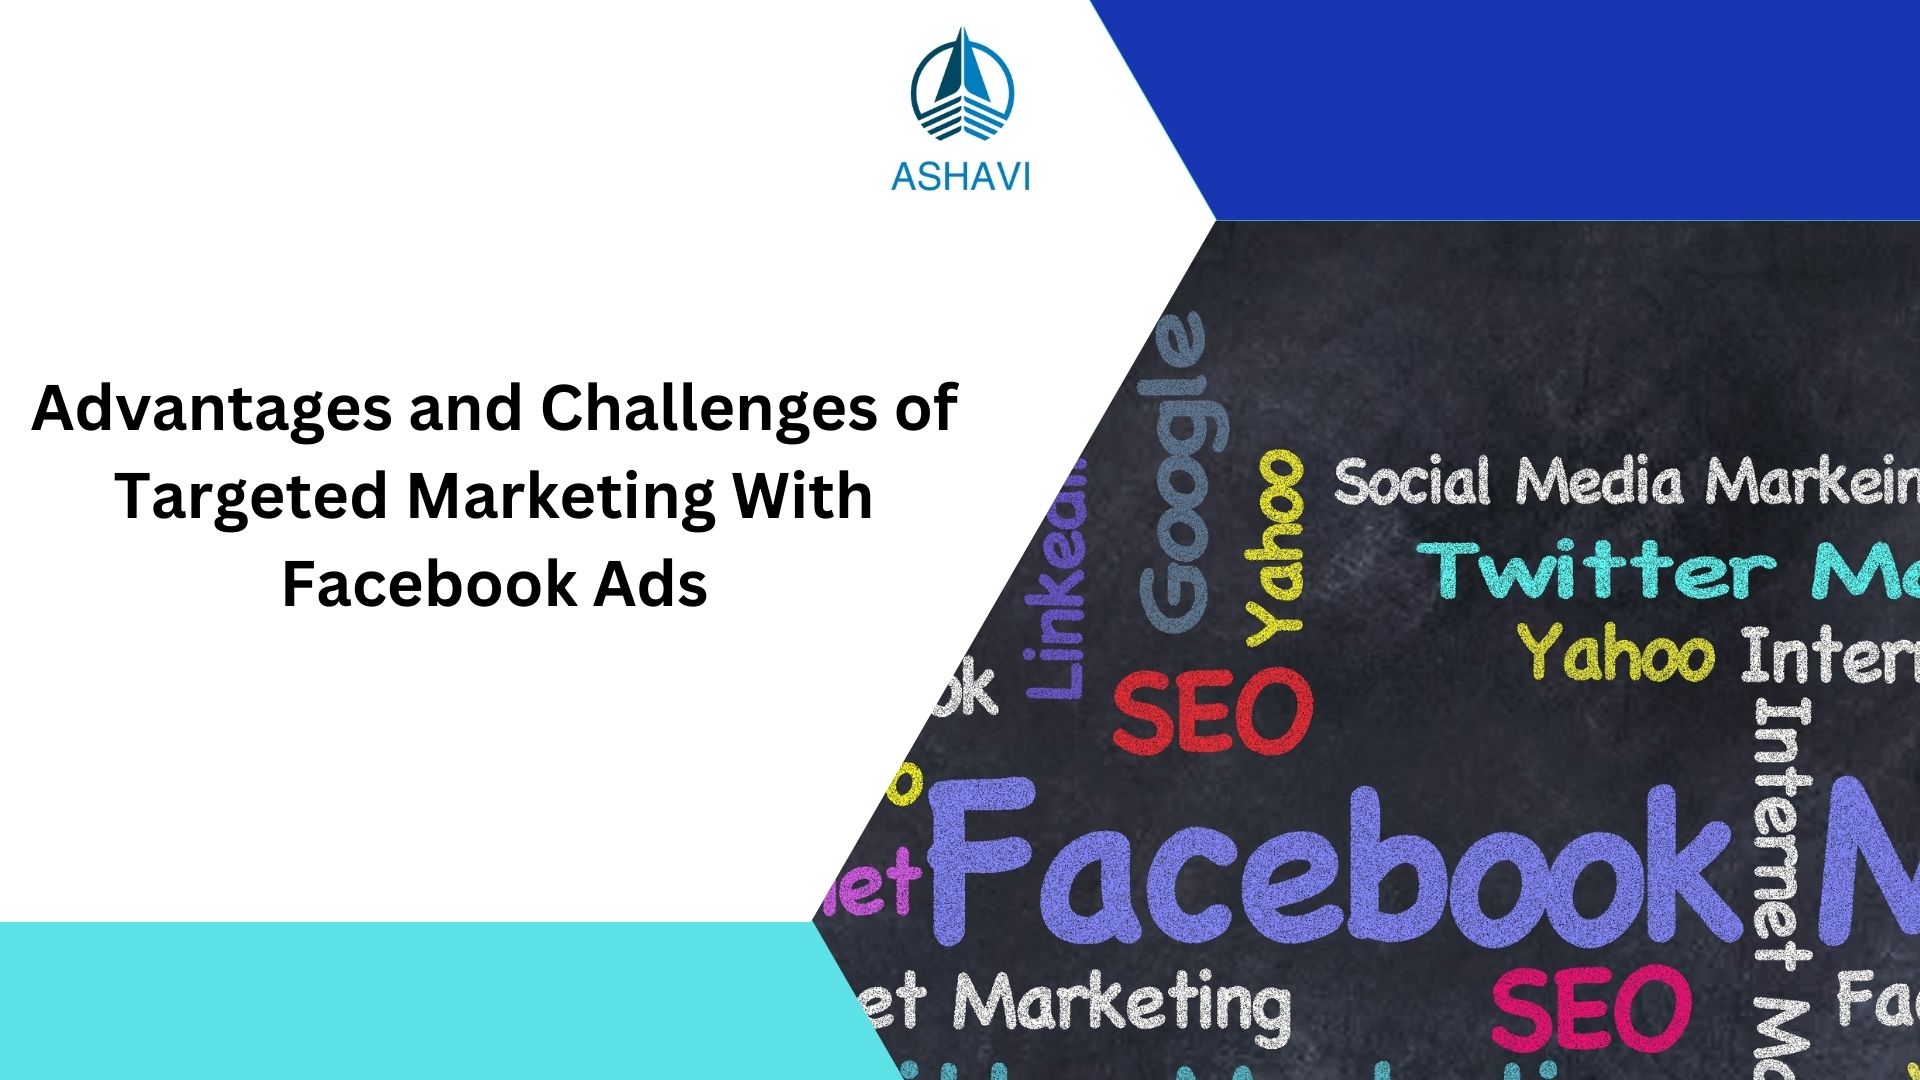 Advantages and Challenges of Targeted Marketing With Facebook Ads